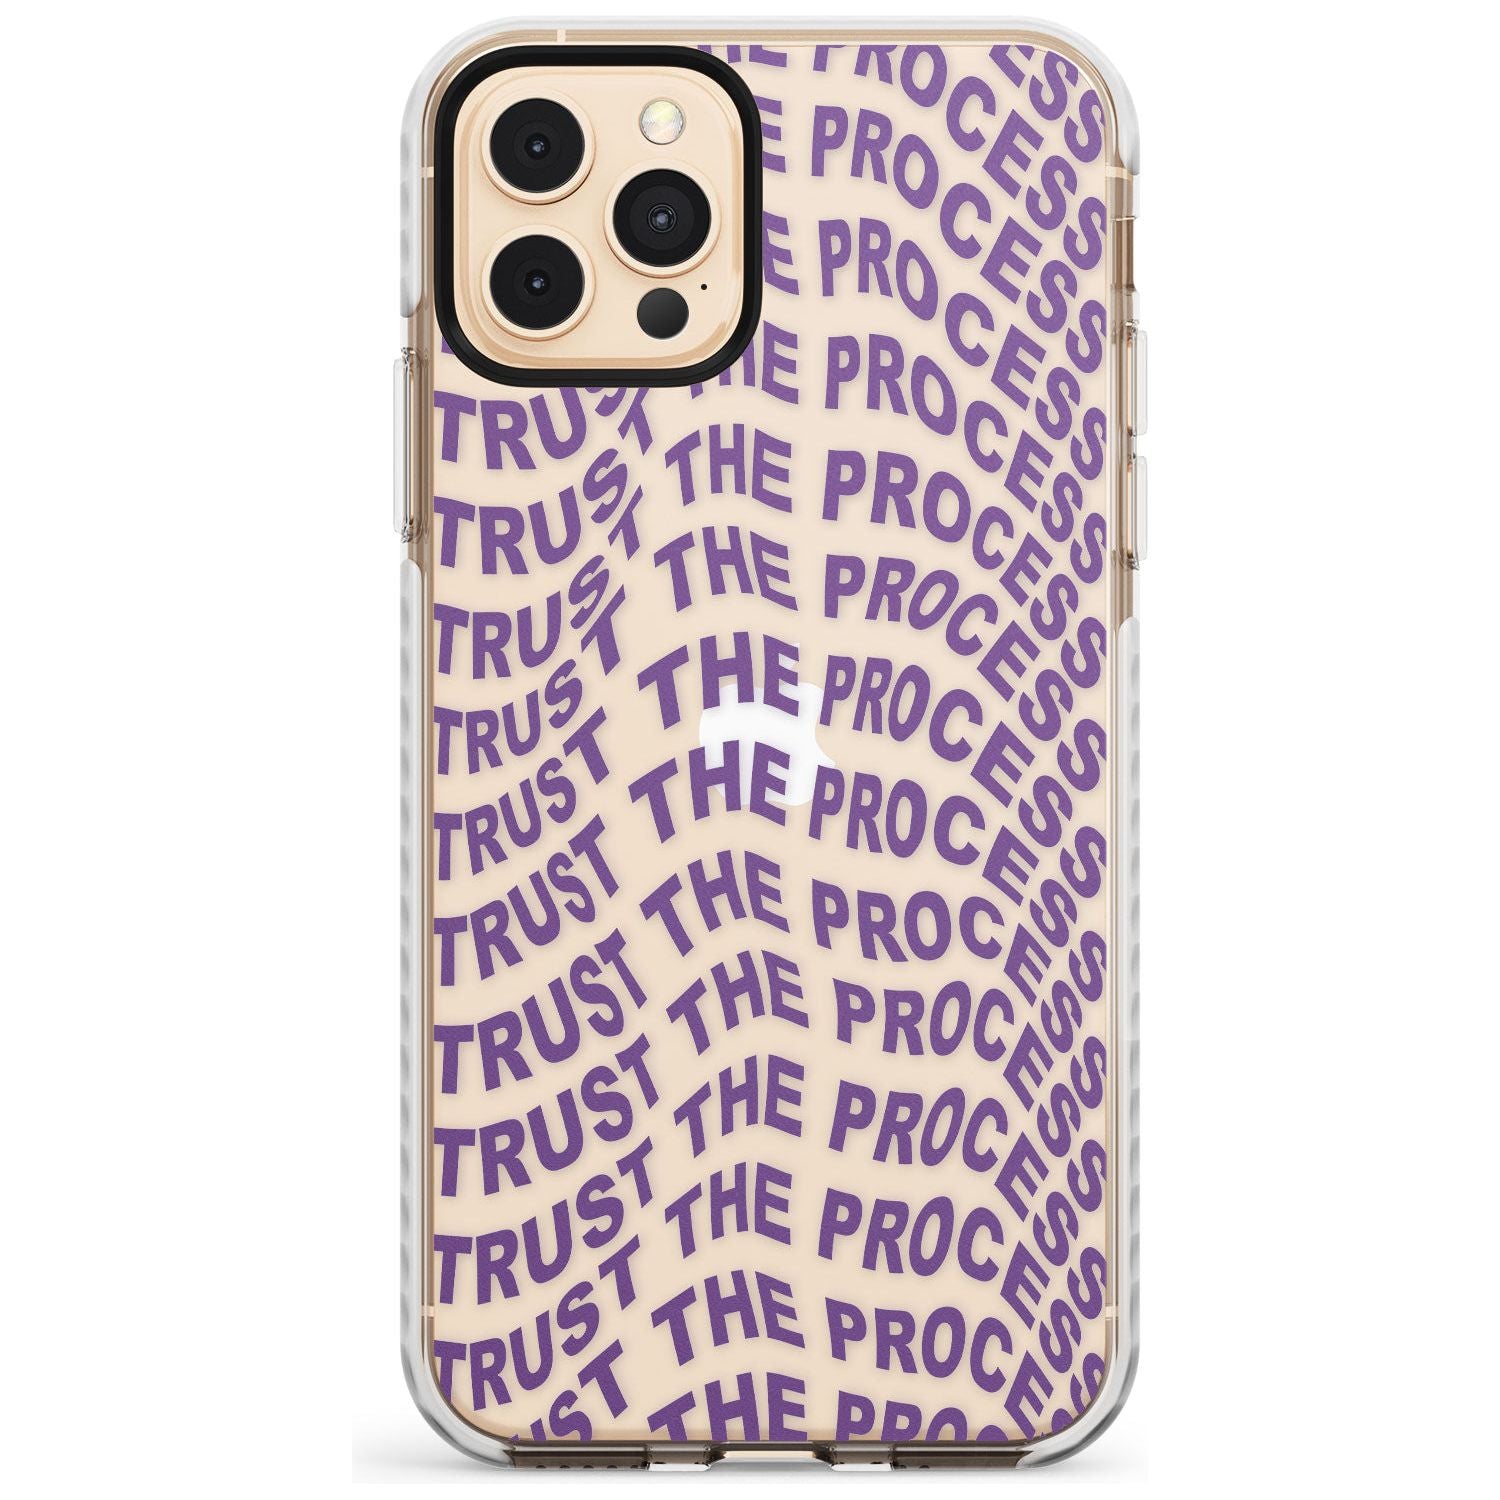 Trust The Process Impact Phone Case for iPhone 11 Pro Max